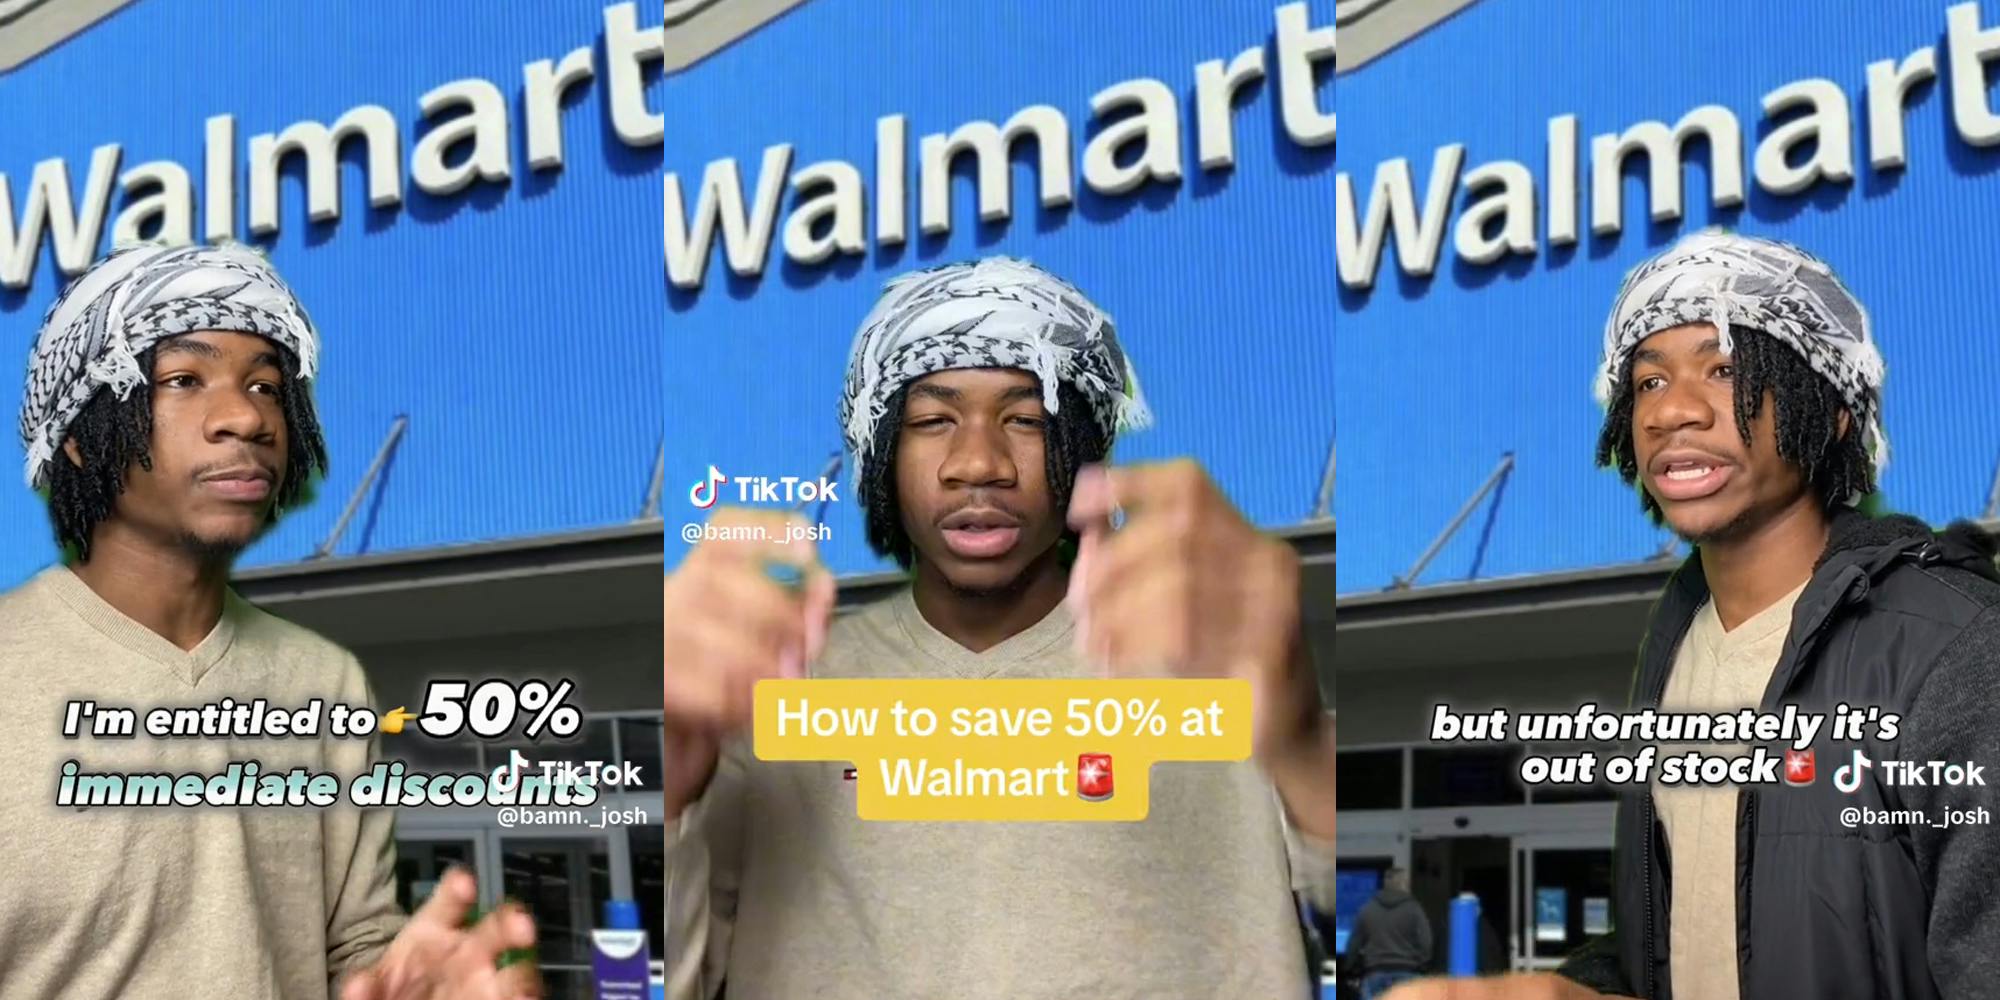 man in front of Walmart with caption "How to save 50% at Walmart"